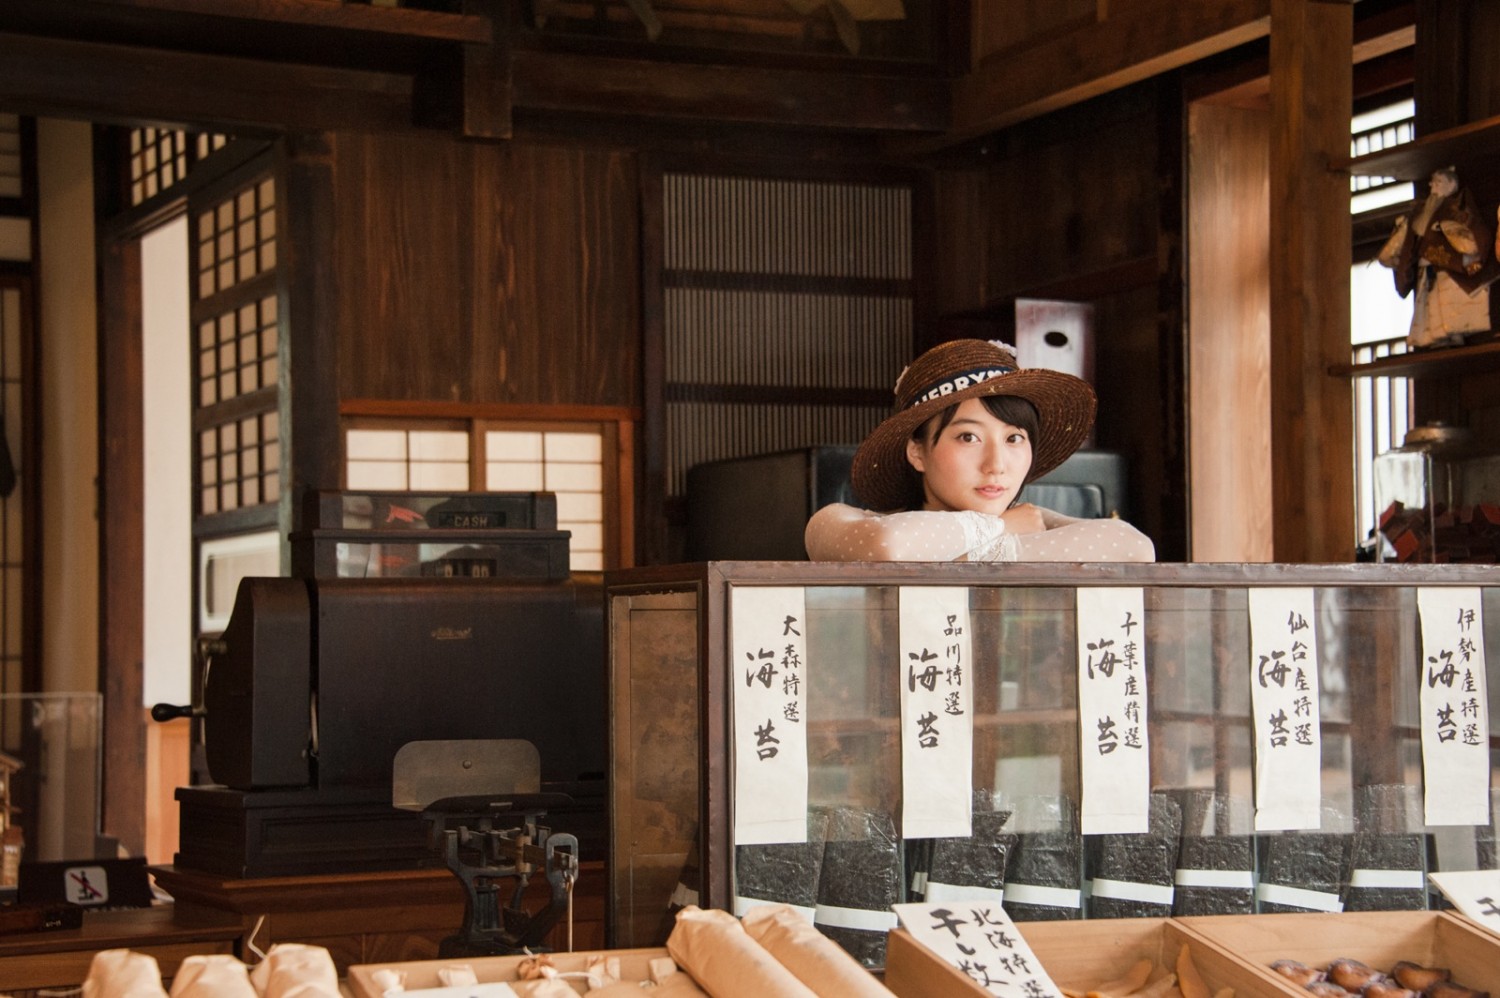 PAST TOKYO with Manami Arai: Manami Gets a Taste of Downtown Nostalgia at the Edo-Tokyo Open Air Architectural Museum